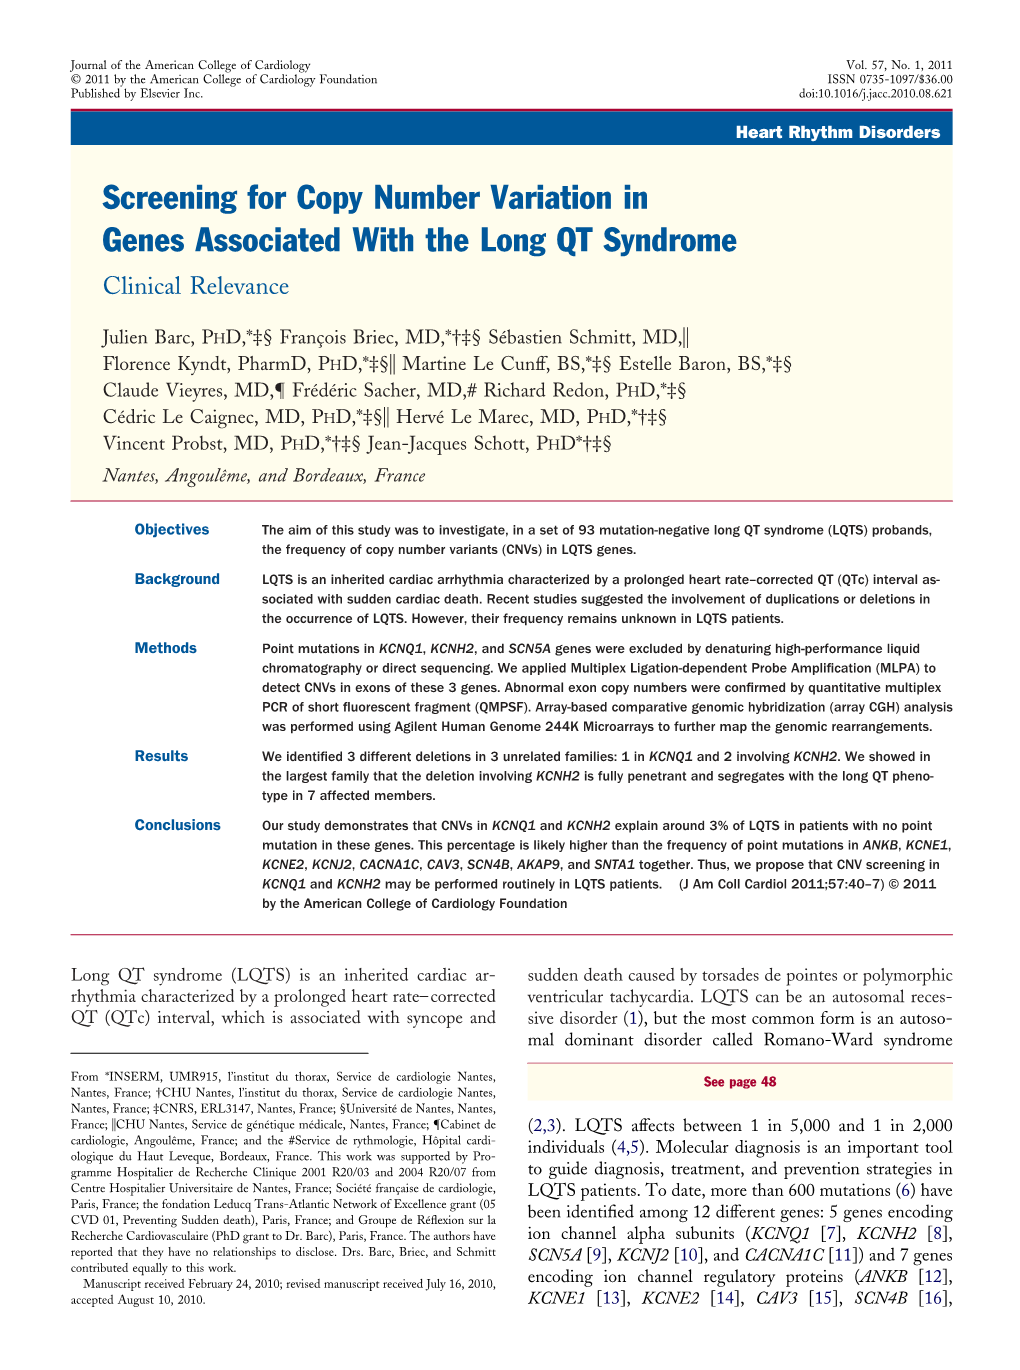 Screening for Copy Number Variation in Genes Associated with the Long QT Syndrome Clinical Relevance